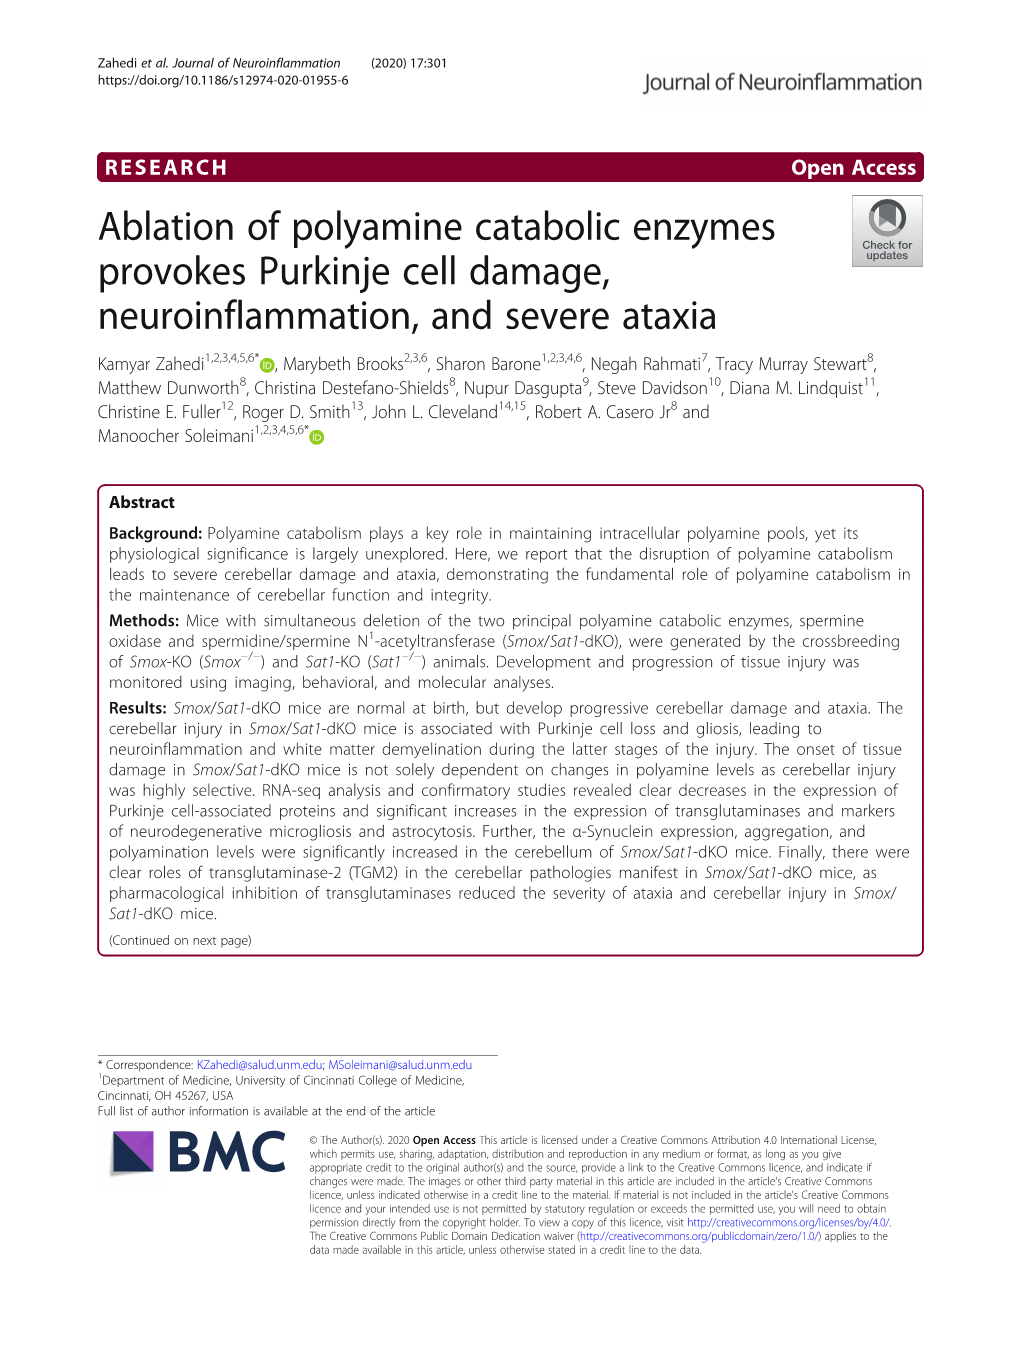 Ablation of Polyamine Catabolic Enzymes Provokes Purkinje Cell